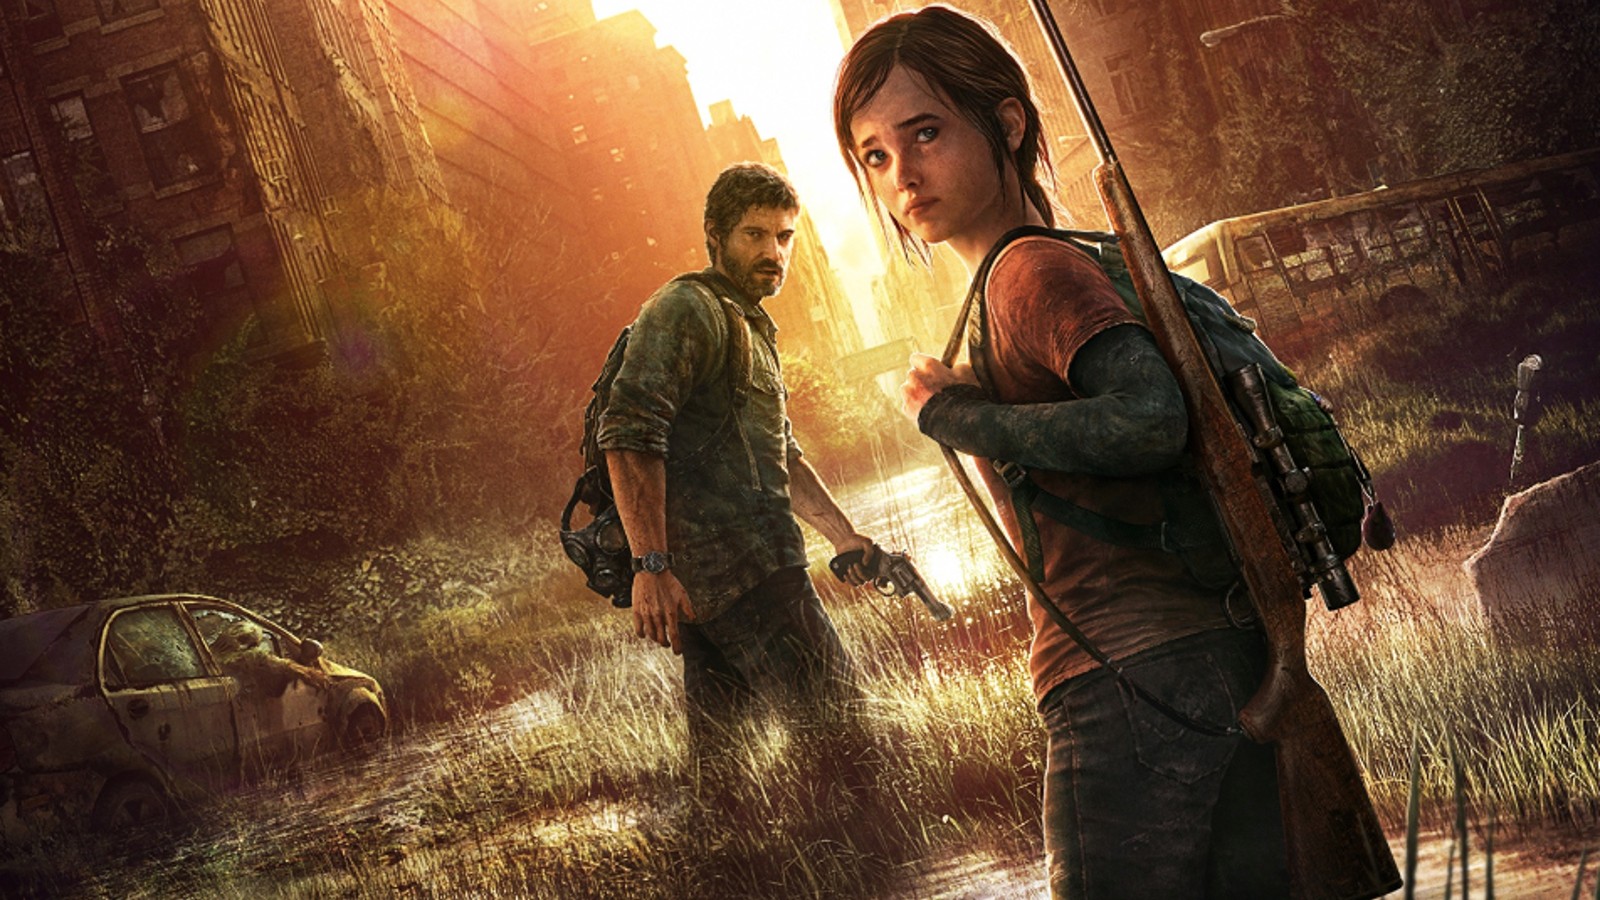 It's confirmed: 'The Last of Us Part II' will span multiple